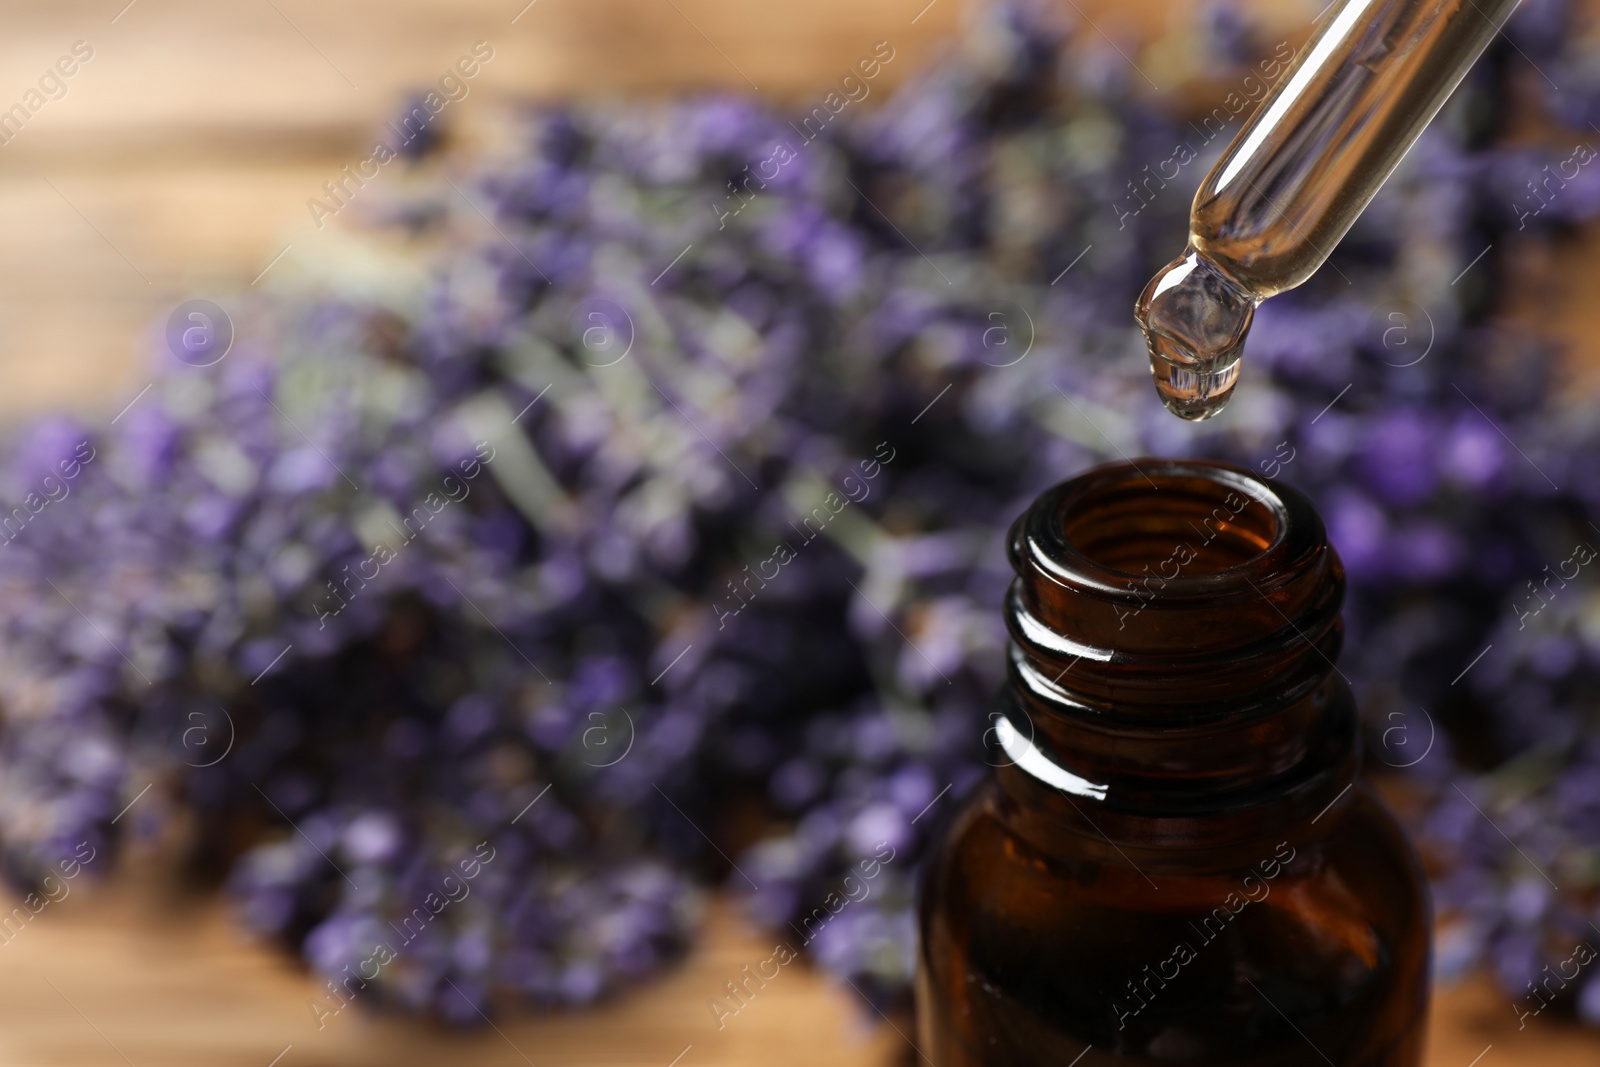 Photo of Dripping lavender essential oil into bottle, closeup. Space for text